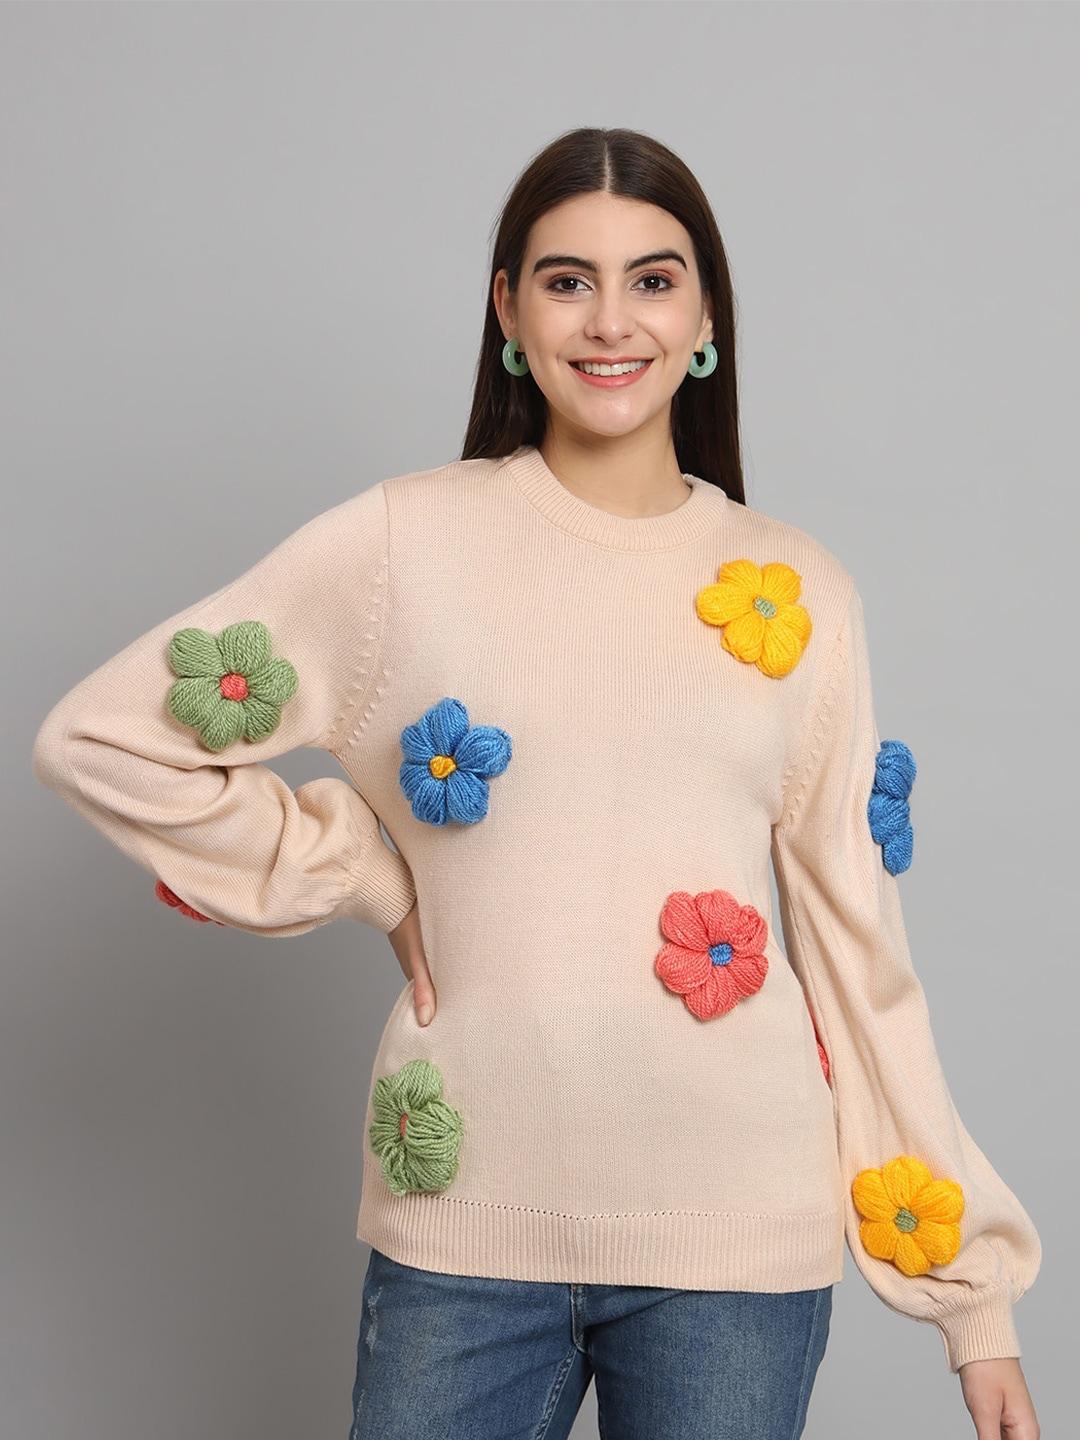 the dry state floral embroidered pullover acrylic sweater